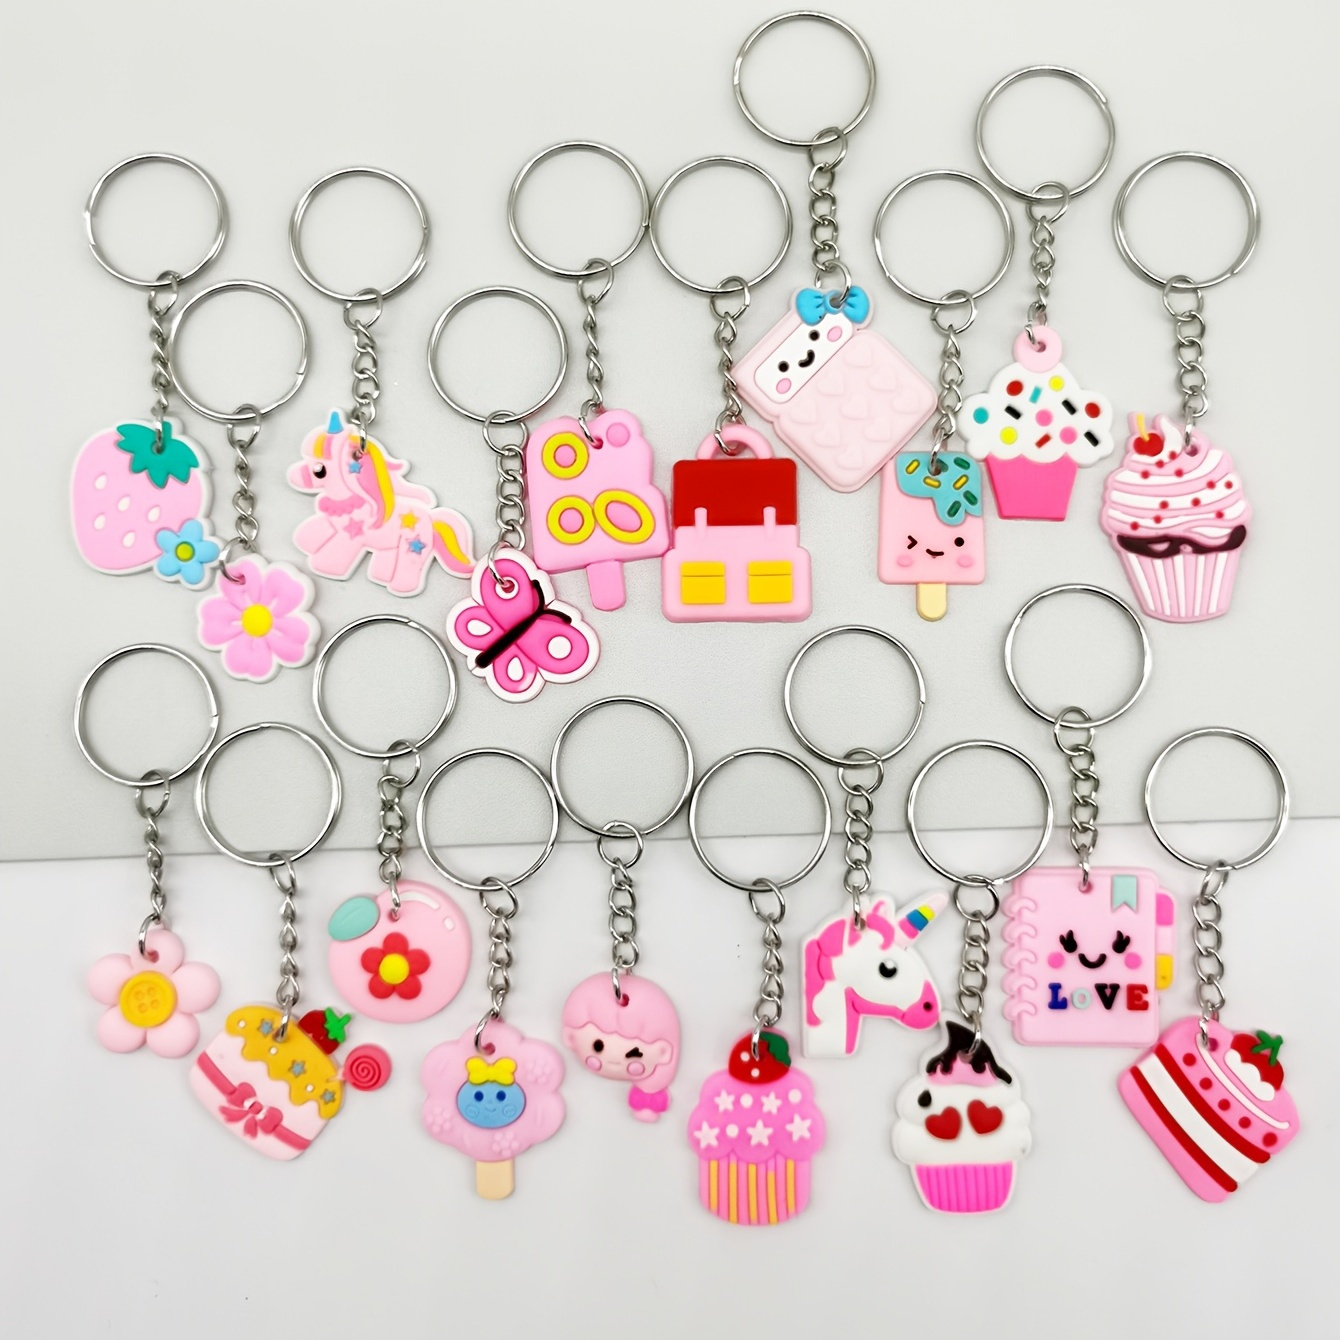 GADMEXILY 100pcs Cartoon Keychain for Kids Party Favors, Mini Cute Keyring  for Classroom Prizes, Birthday Christmas Party Favors Gift, Goodie Bag